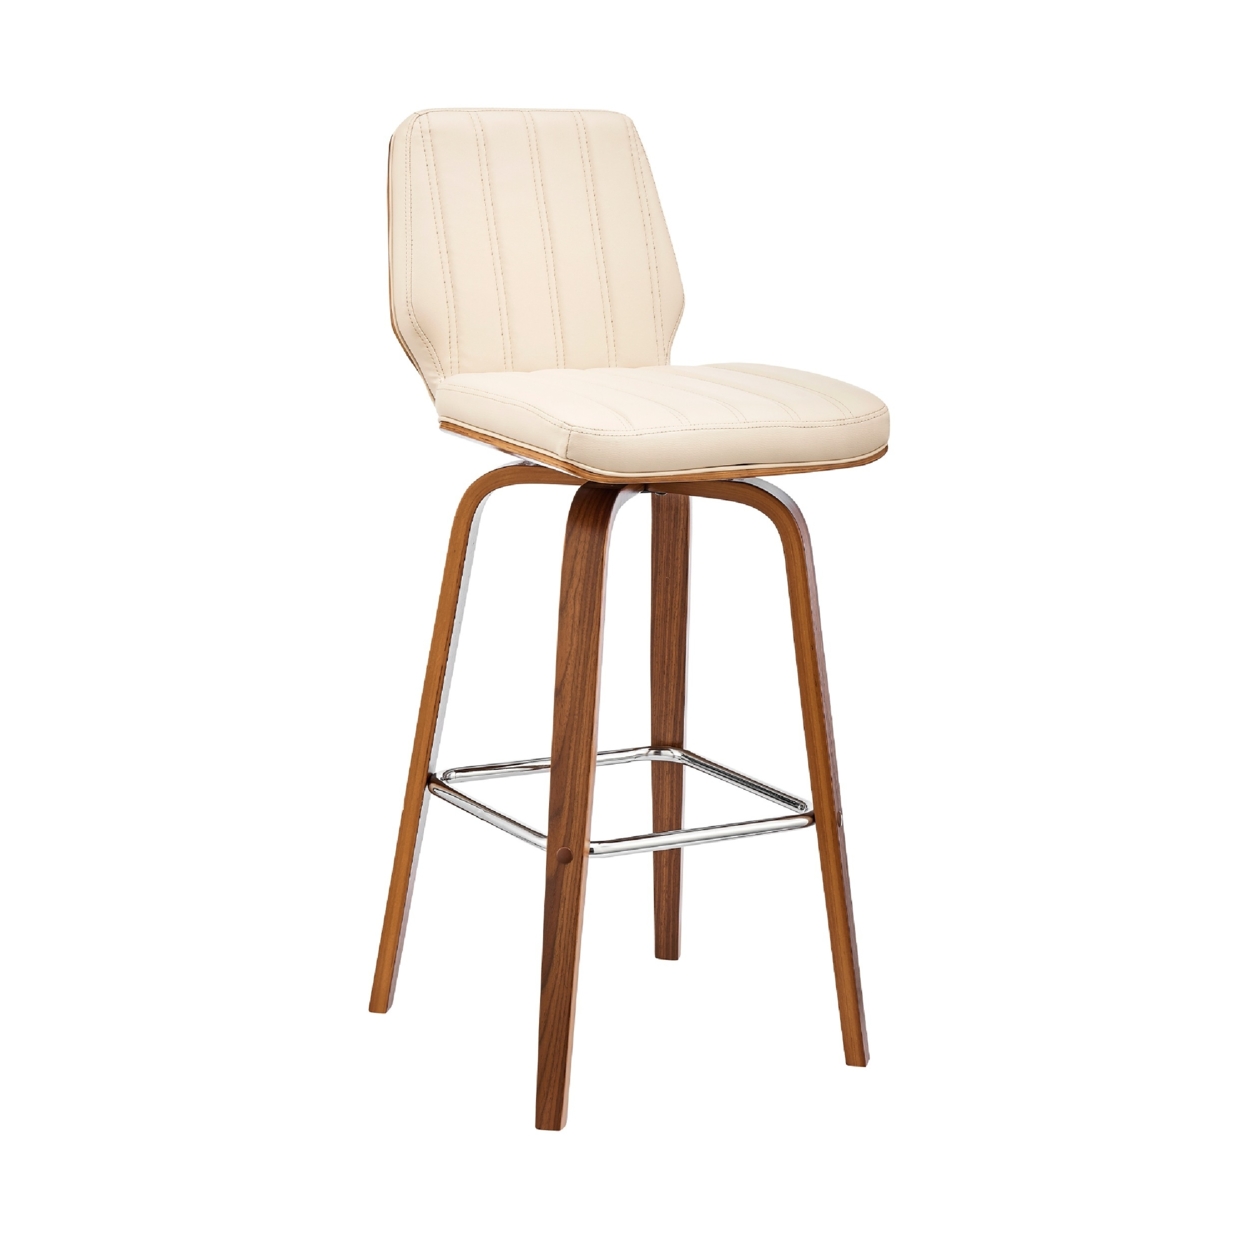 Swivel Barstool With Channel Stitching And Wooden Support, Cream And Brown- Saltoro Sherpi